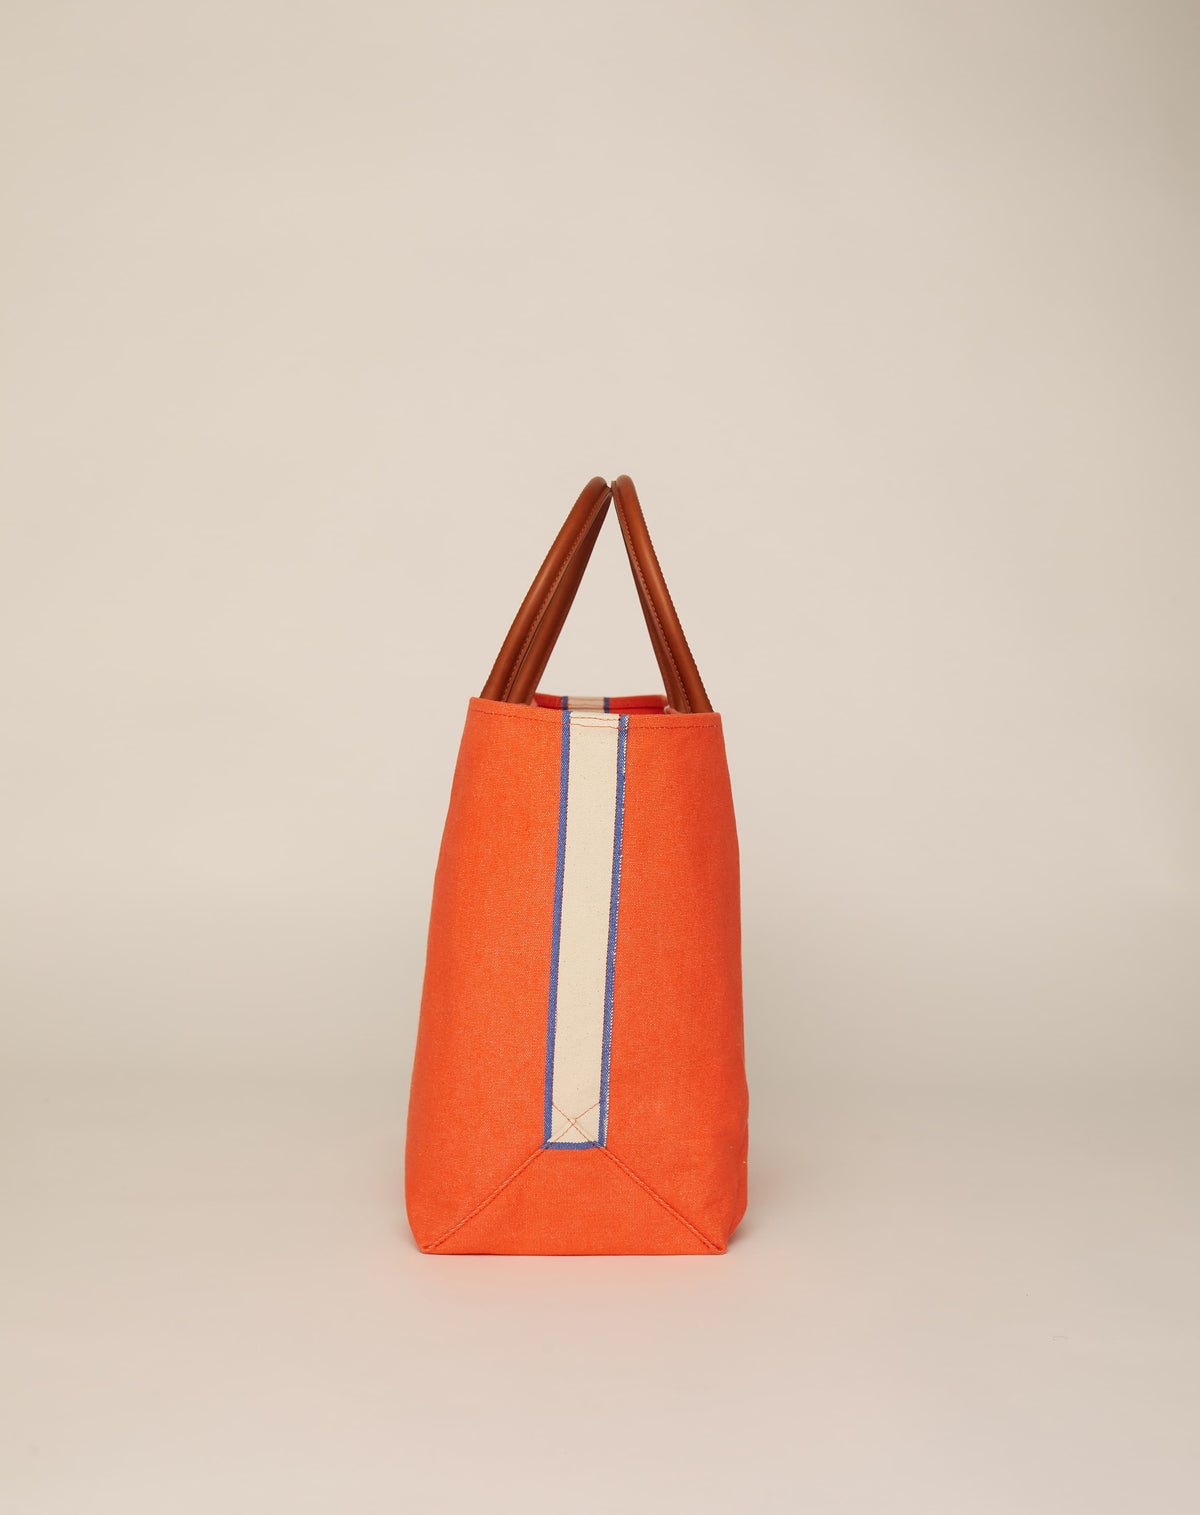 Profile image of classic canvas tote bag in bright orange colour with tan leather handles and contrasting natural ecru stripes.